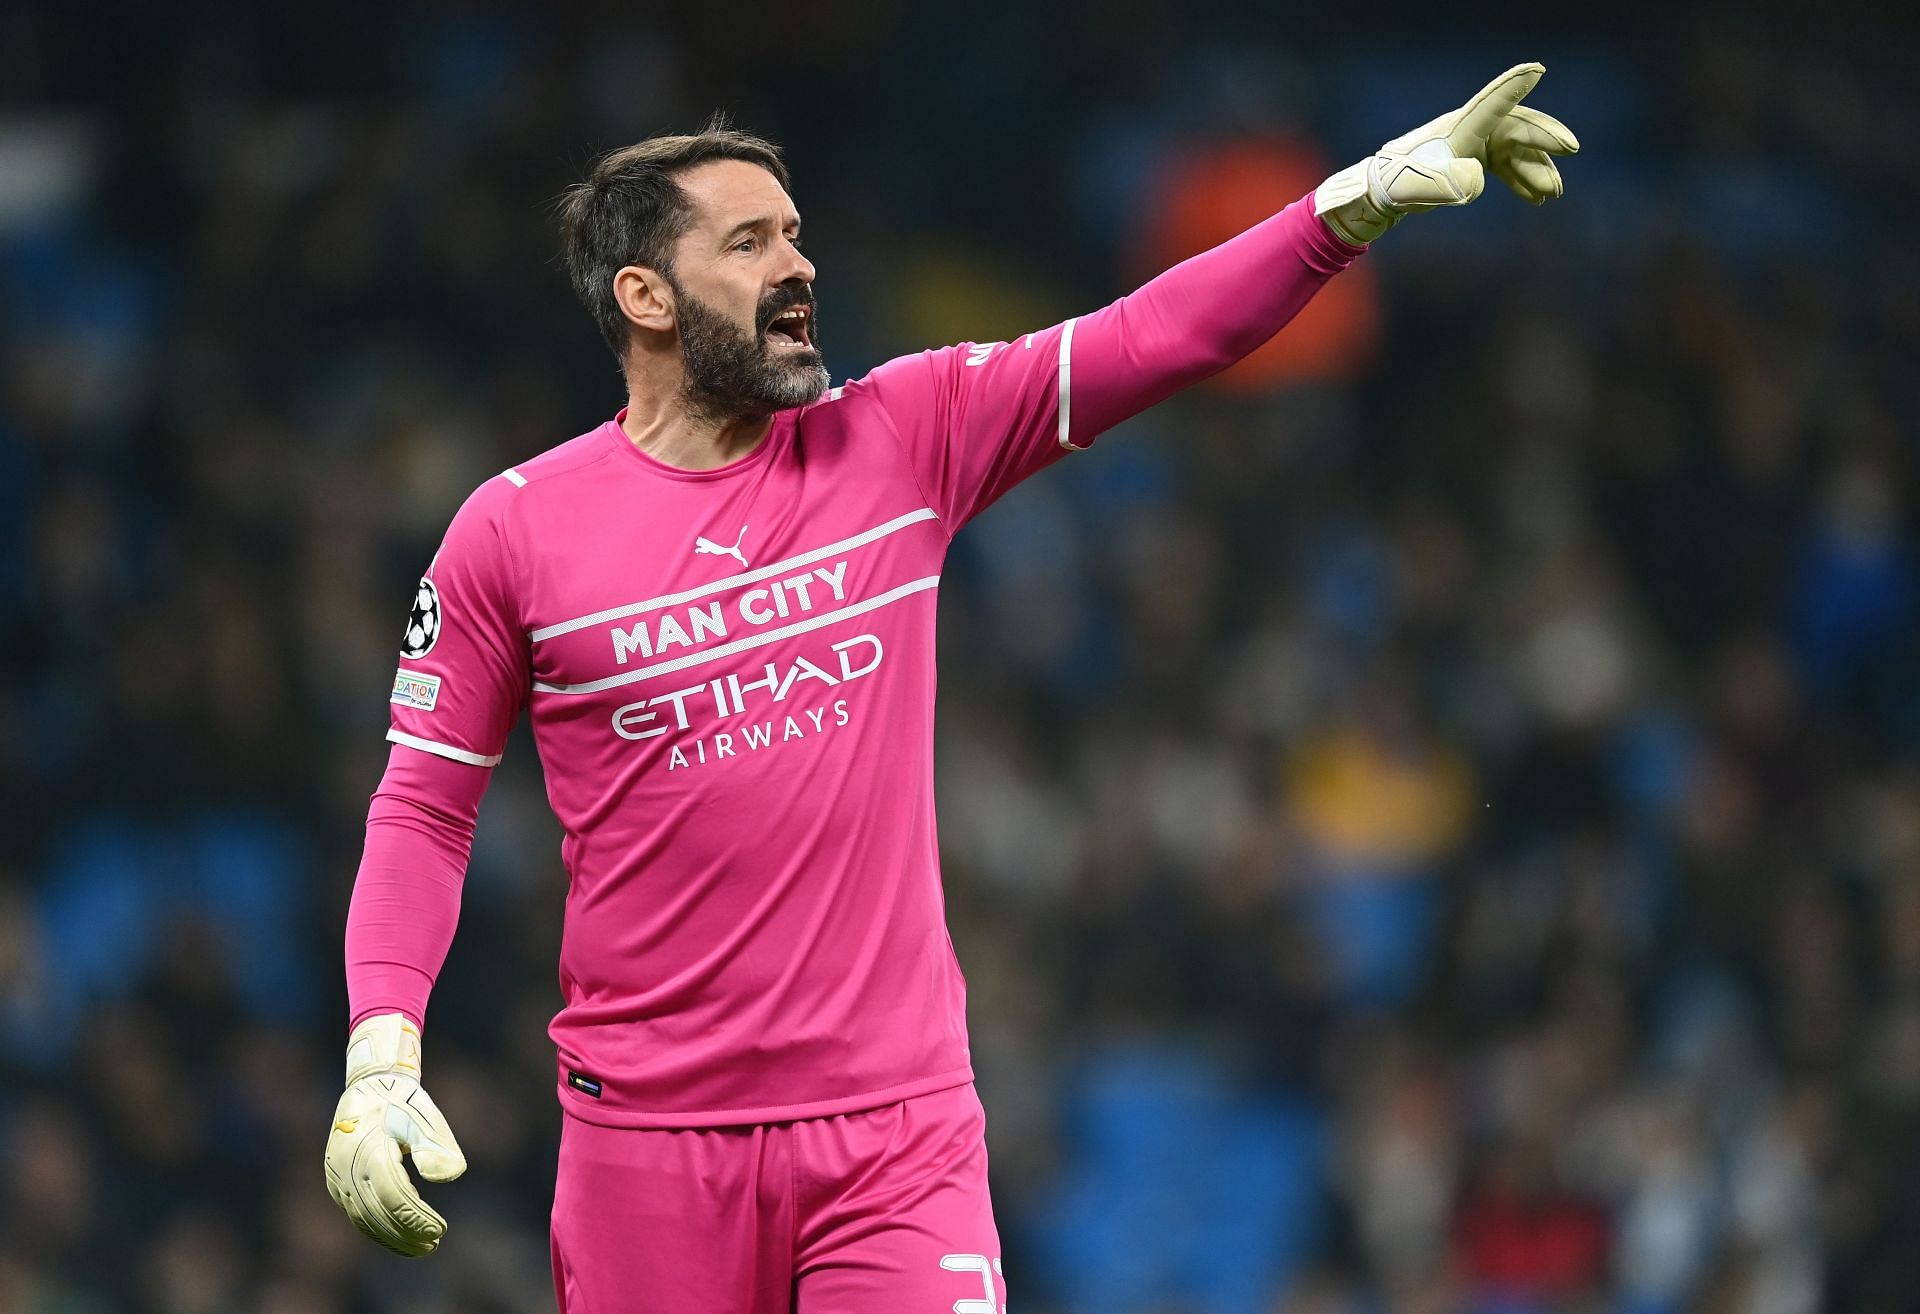 Scott Carson made his first European appearance in 17 years